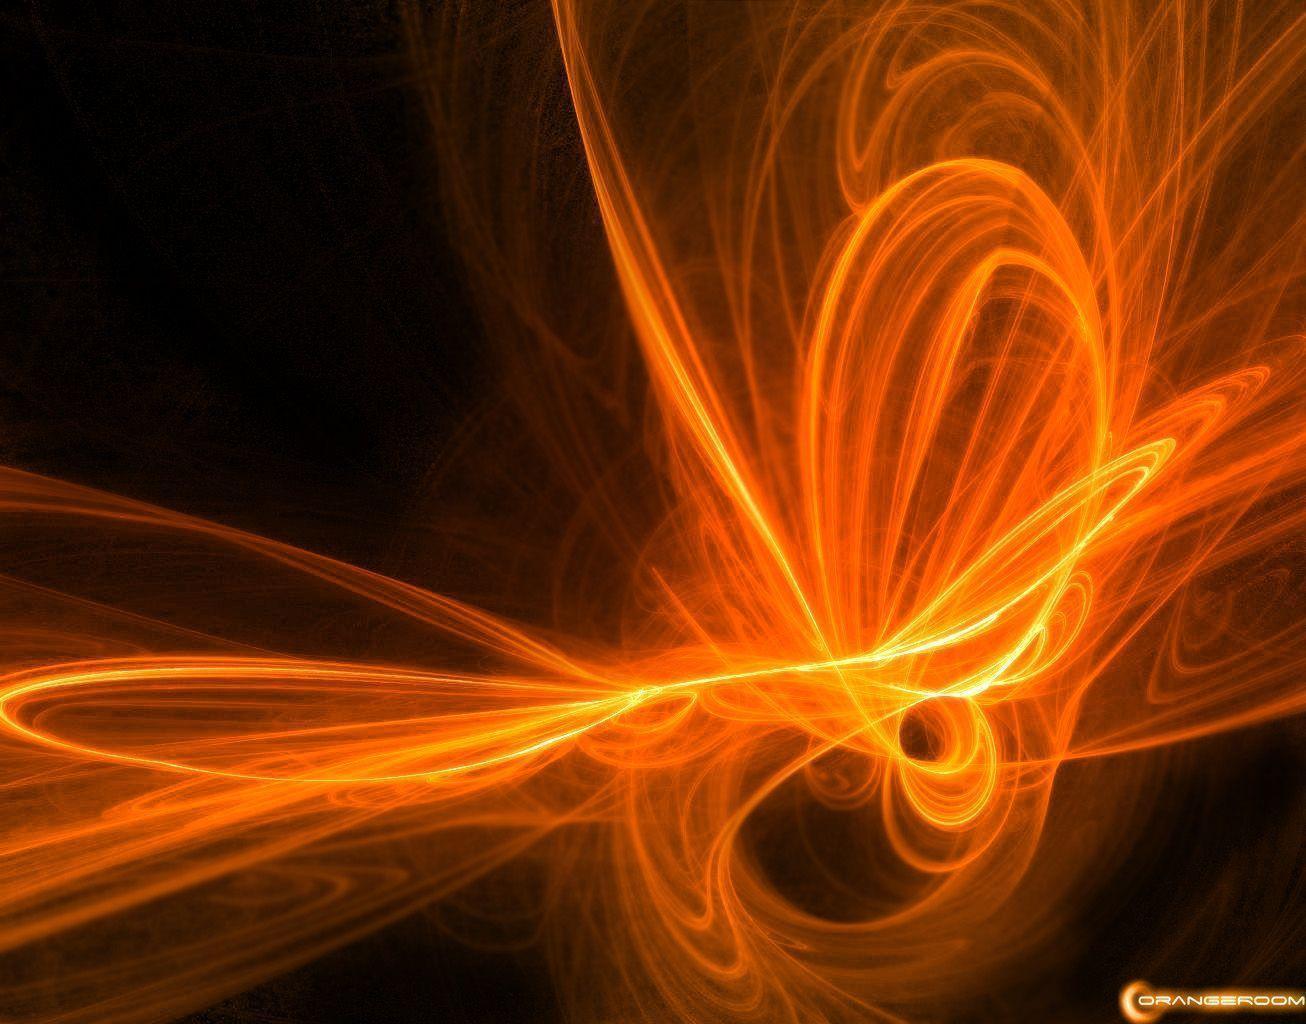 Wallpaper For > Cool Orange And Black Background